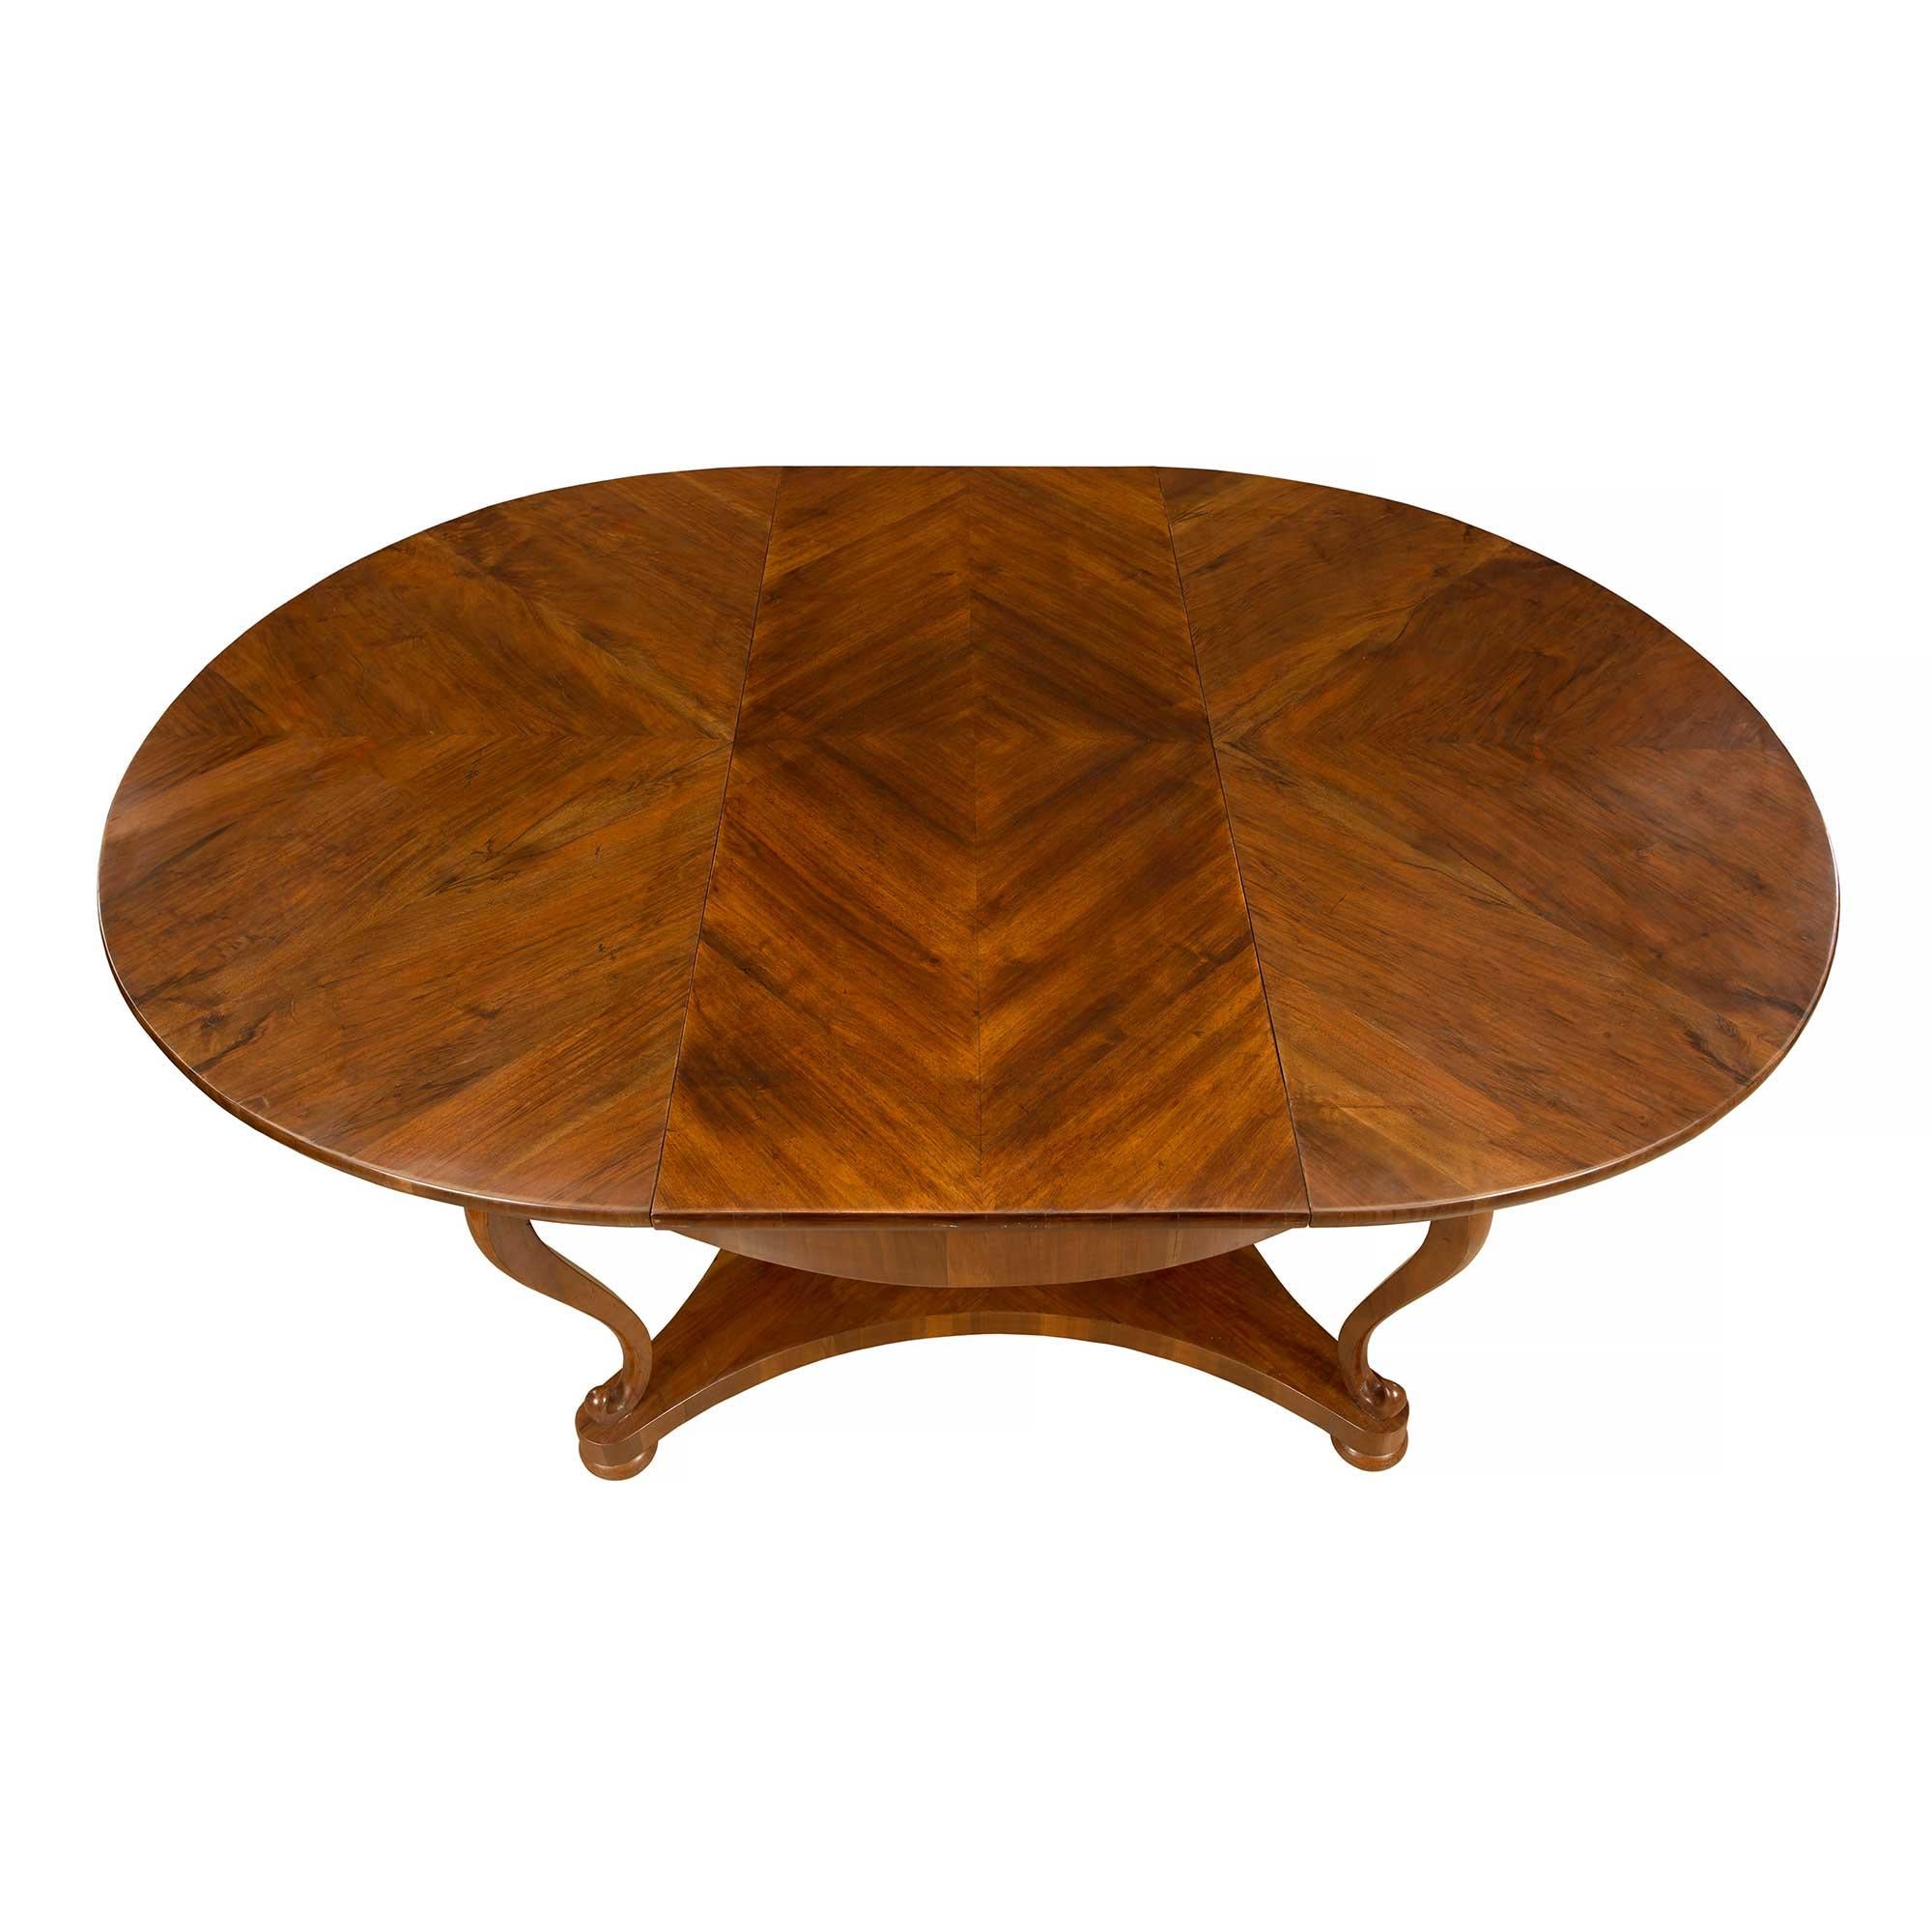 A lovely and unique Italian 18th-century walnut circular/oval center table from Northern Italy. The elegant table is raised on four bun feet below an X stretcher with concave sides and a quarter veneer pattern. Above are S scrolled cabriole legs